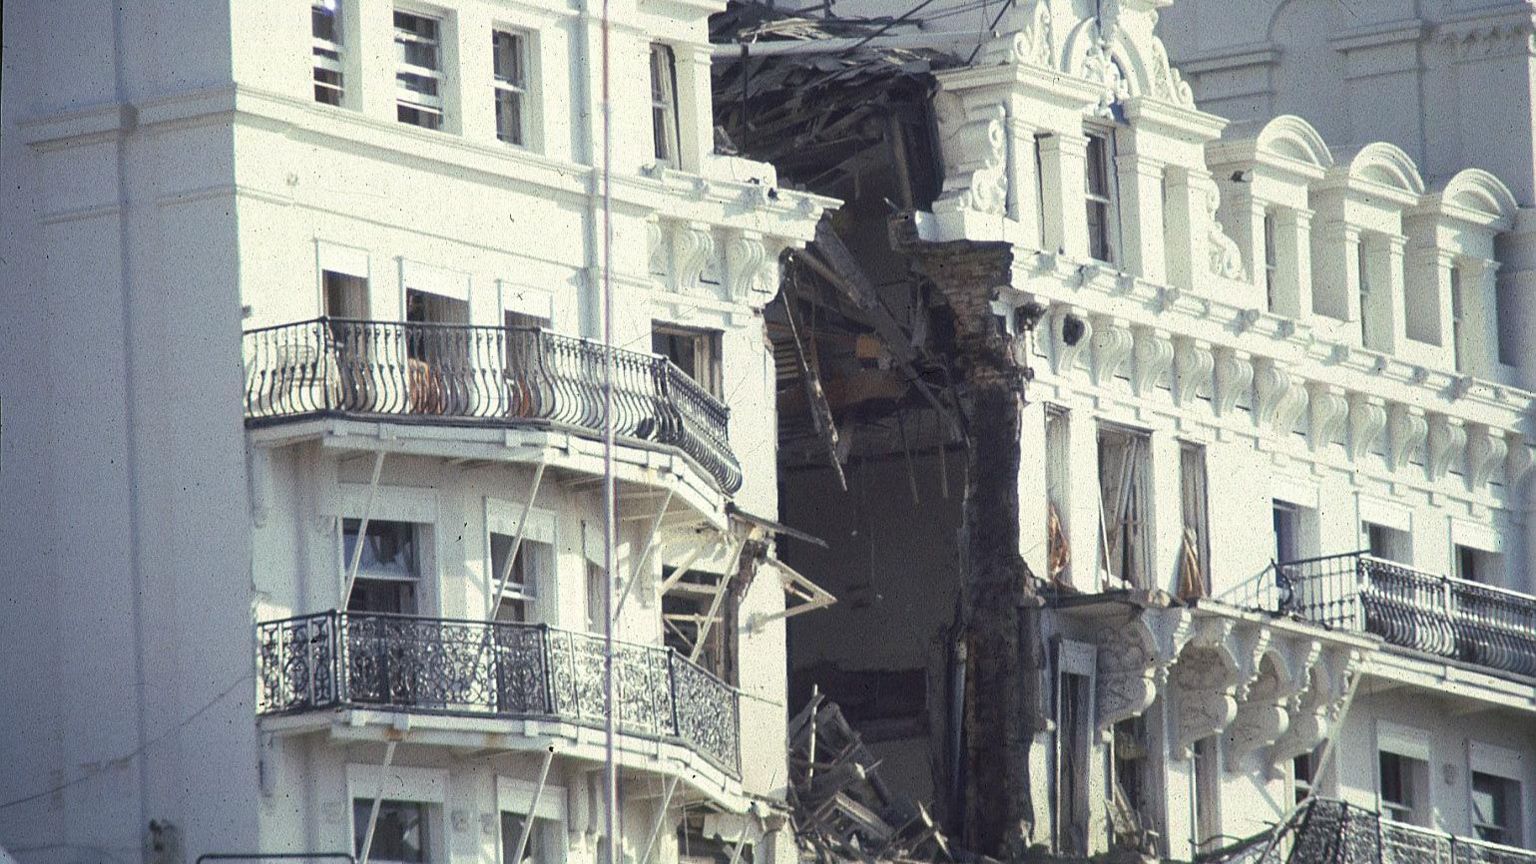 The Grand showing damage from the explosion in 1984